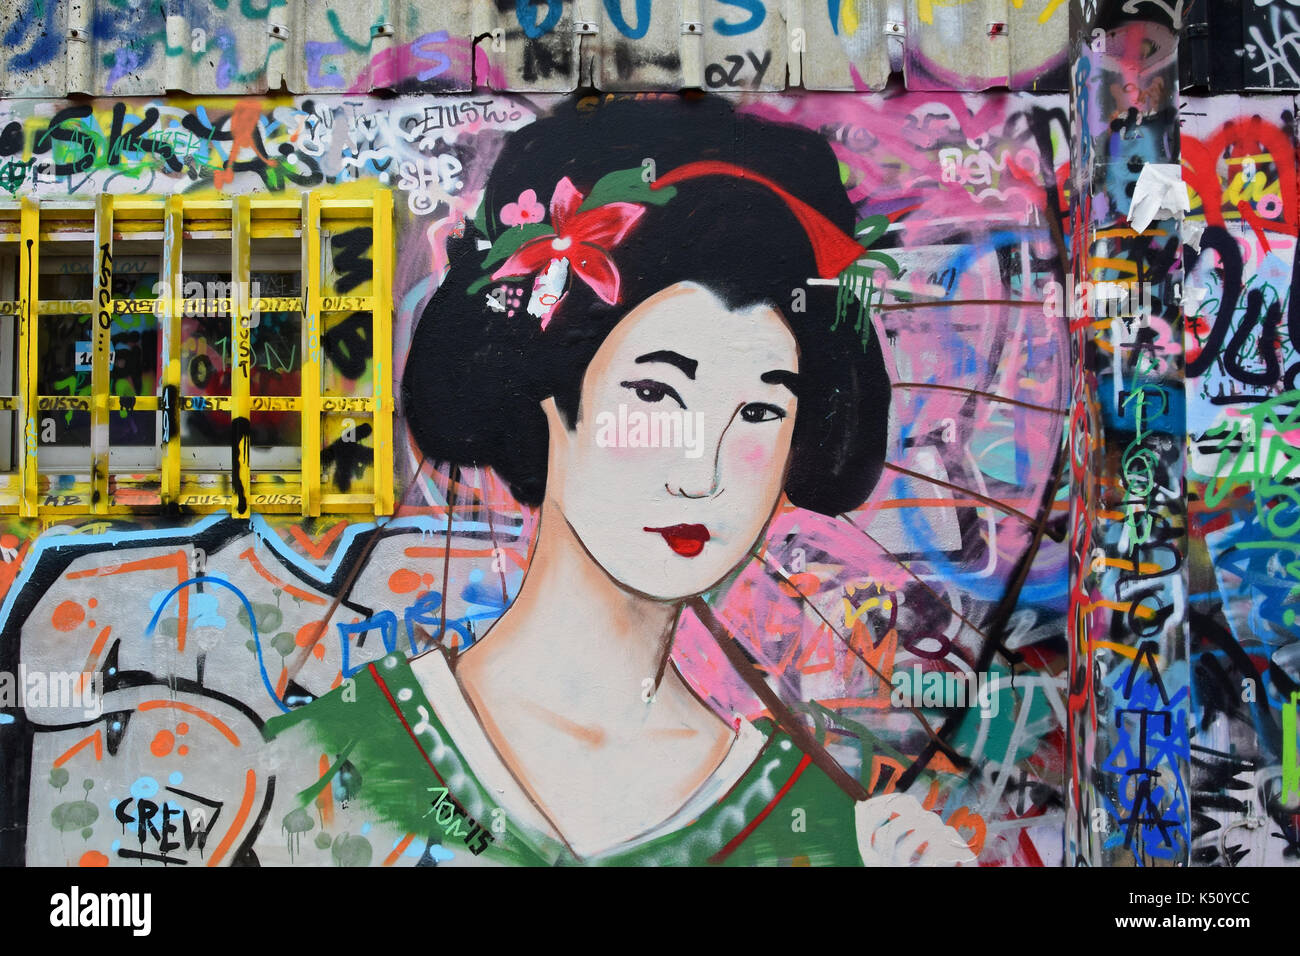 ATHENS, GREECE - DECEMBER 10, 2015: Geisha graffiti traditional japanese female figure with parasol on colorful spray painted wall. Urban street art. Stock Photo